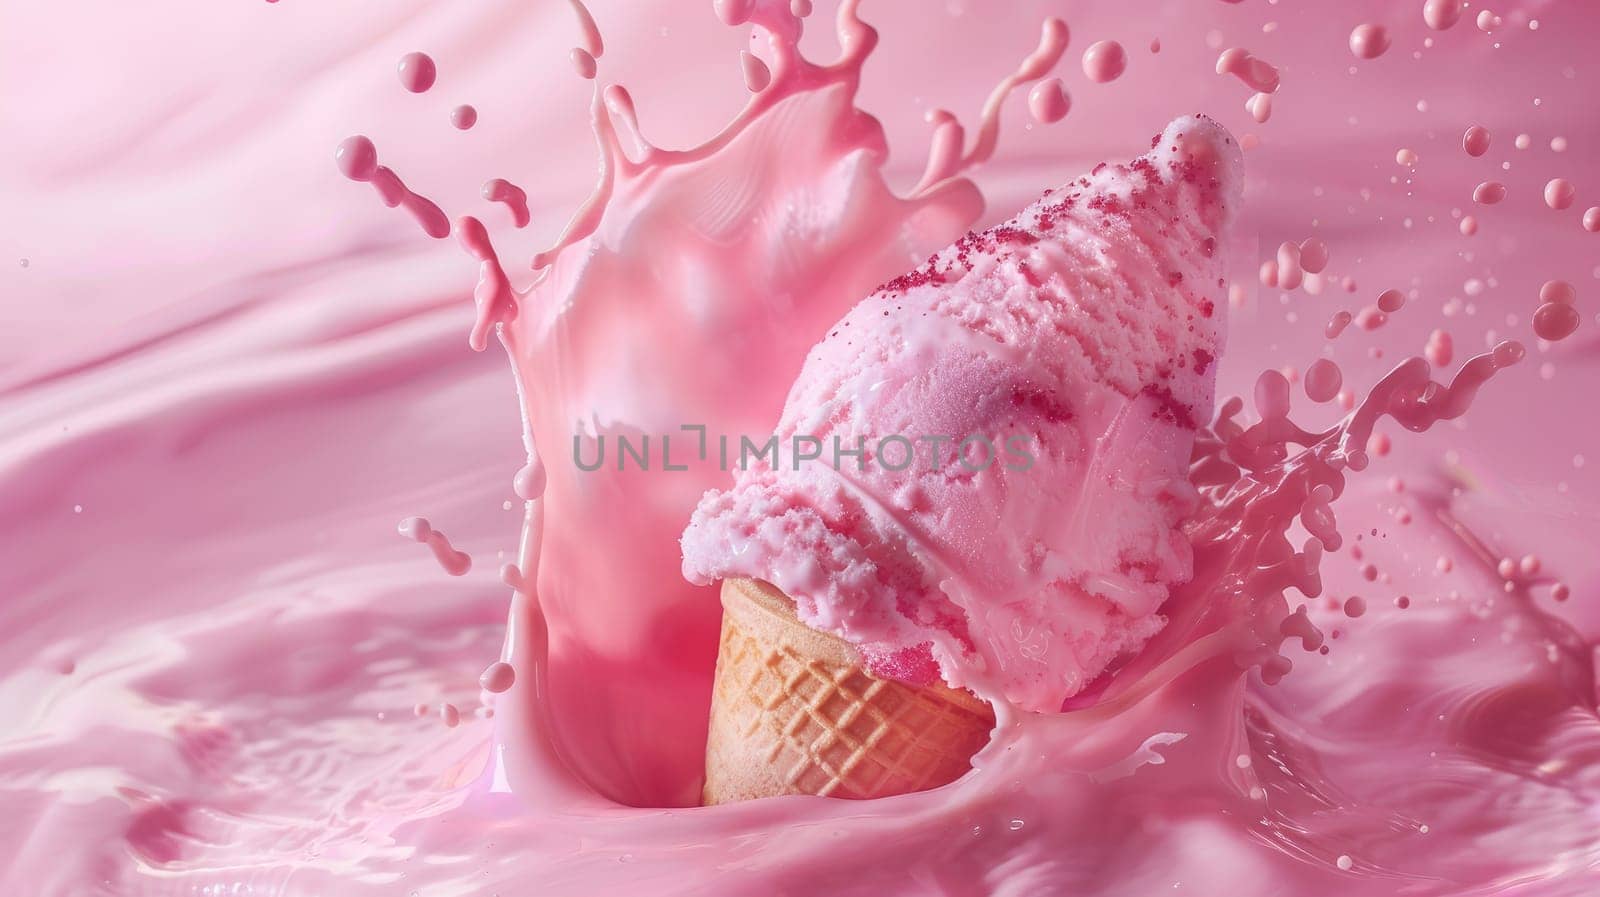 Tasty sweet Ice cream with mixed berry, Pastel colors ice cream banner background template with copy space.